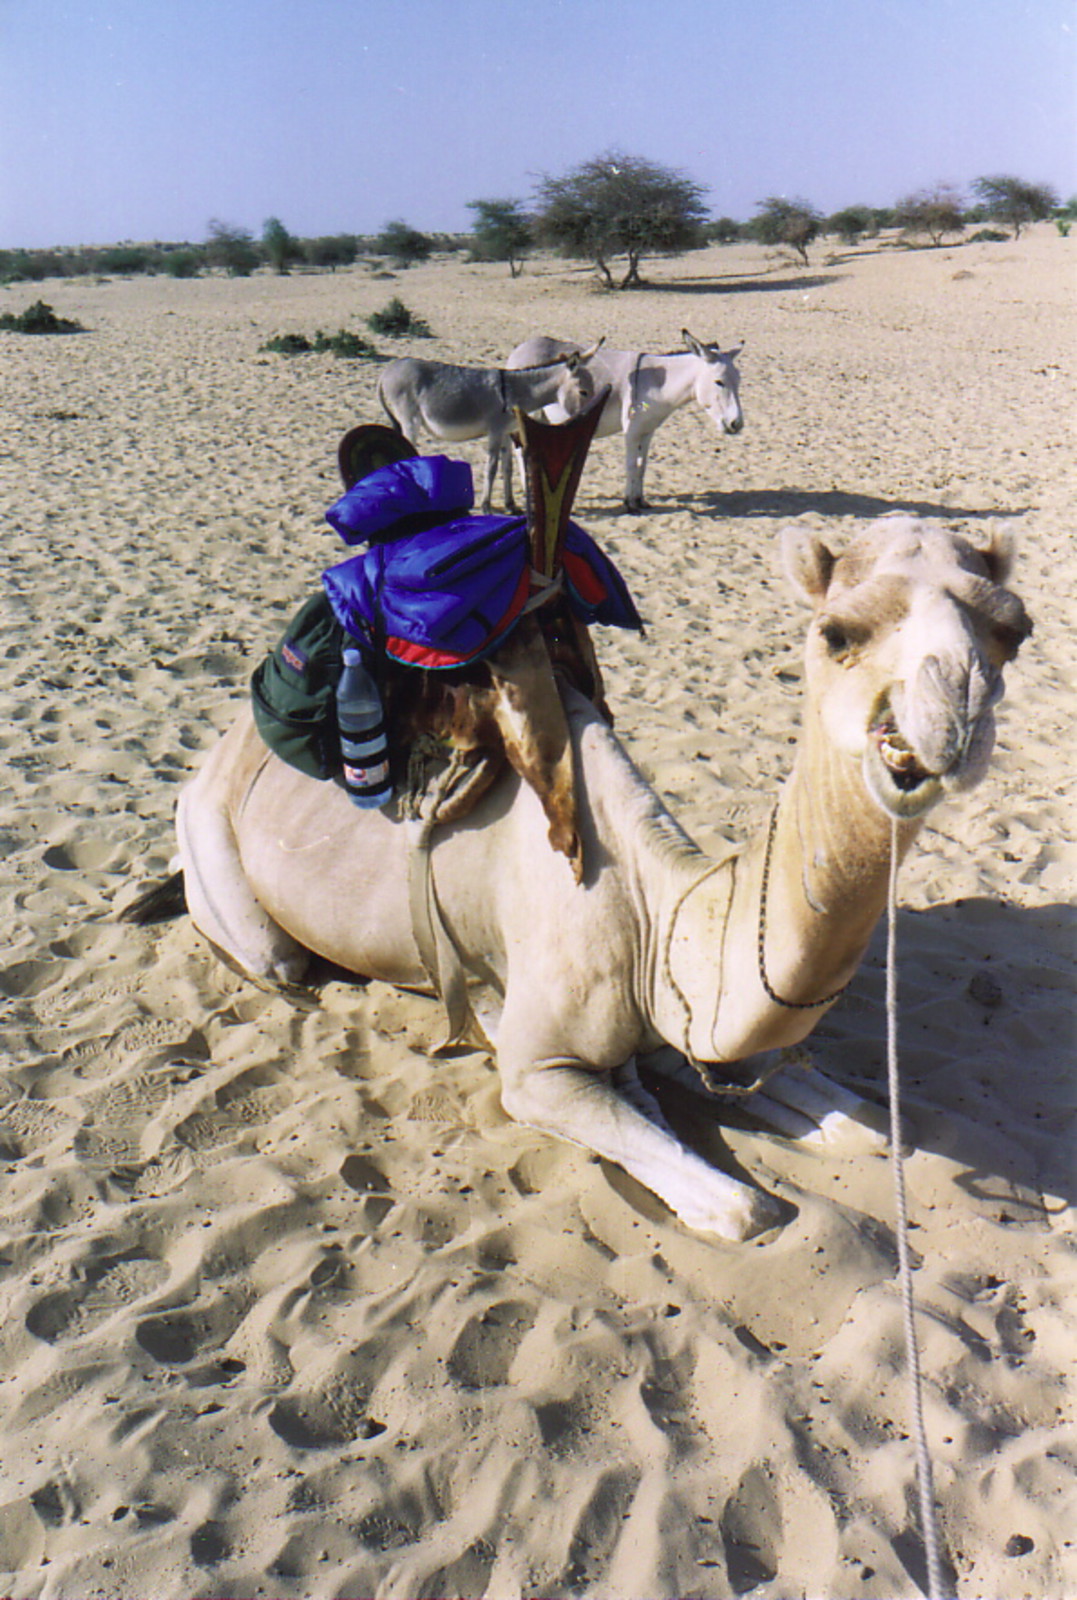 Orwah the camel, showing the seat the Tuareg use